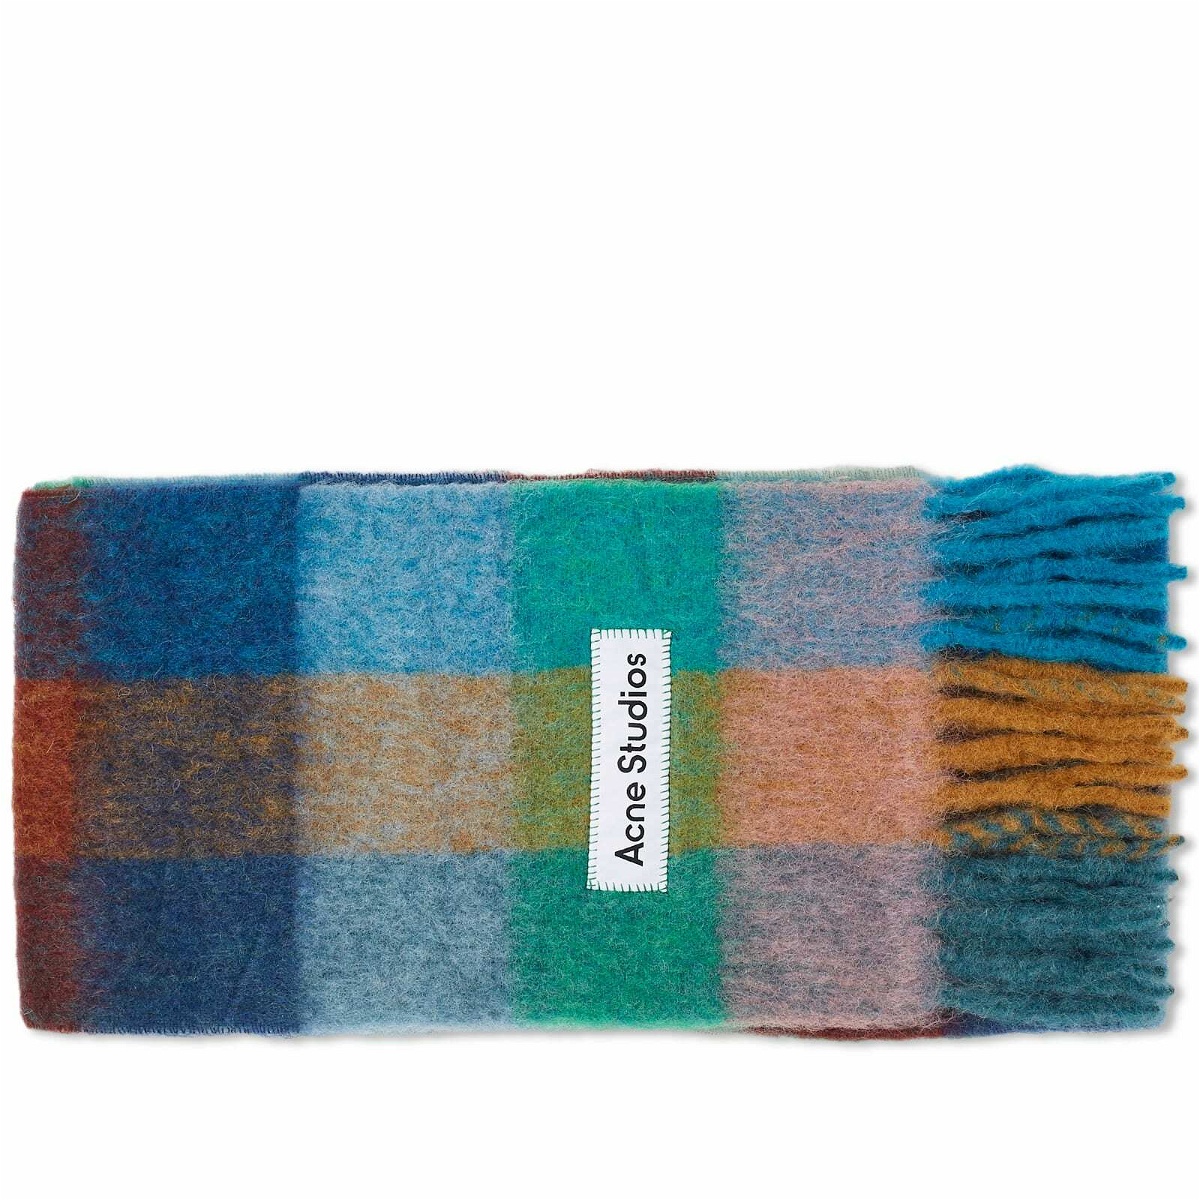 Photo: Acne Studios Men's Vally Check Scarf in Turquoise/Camel/Blue